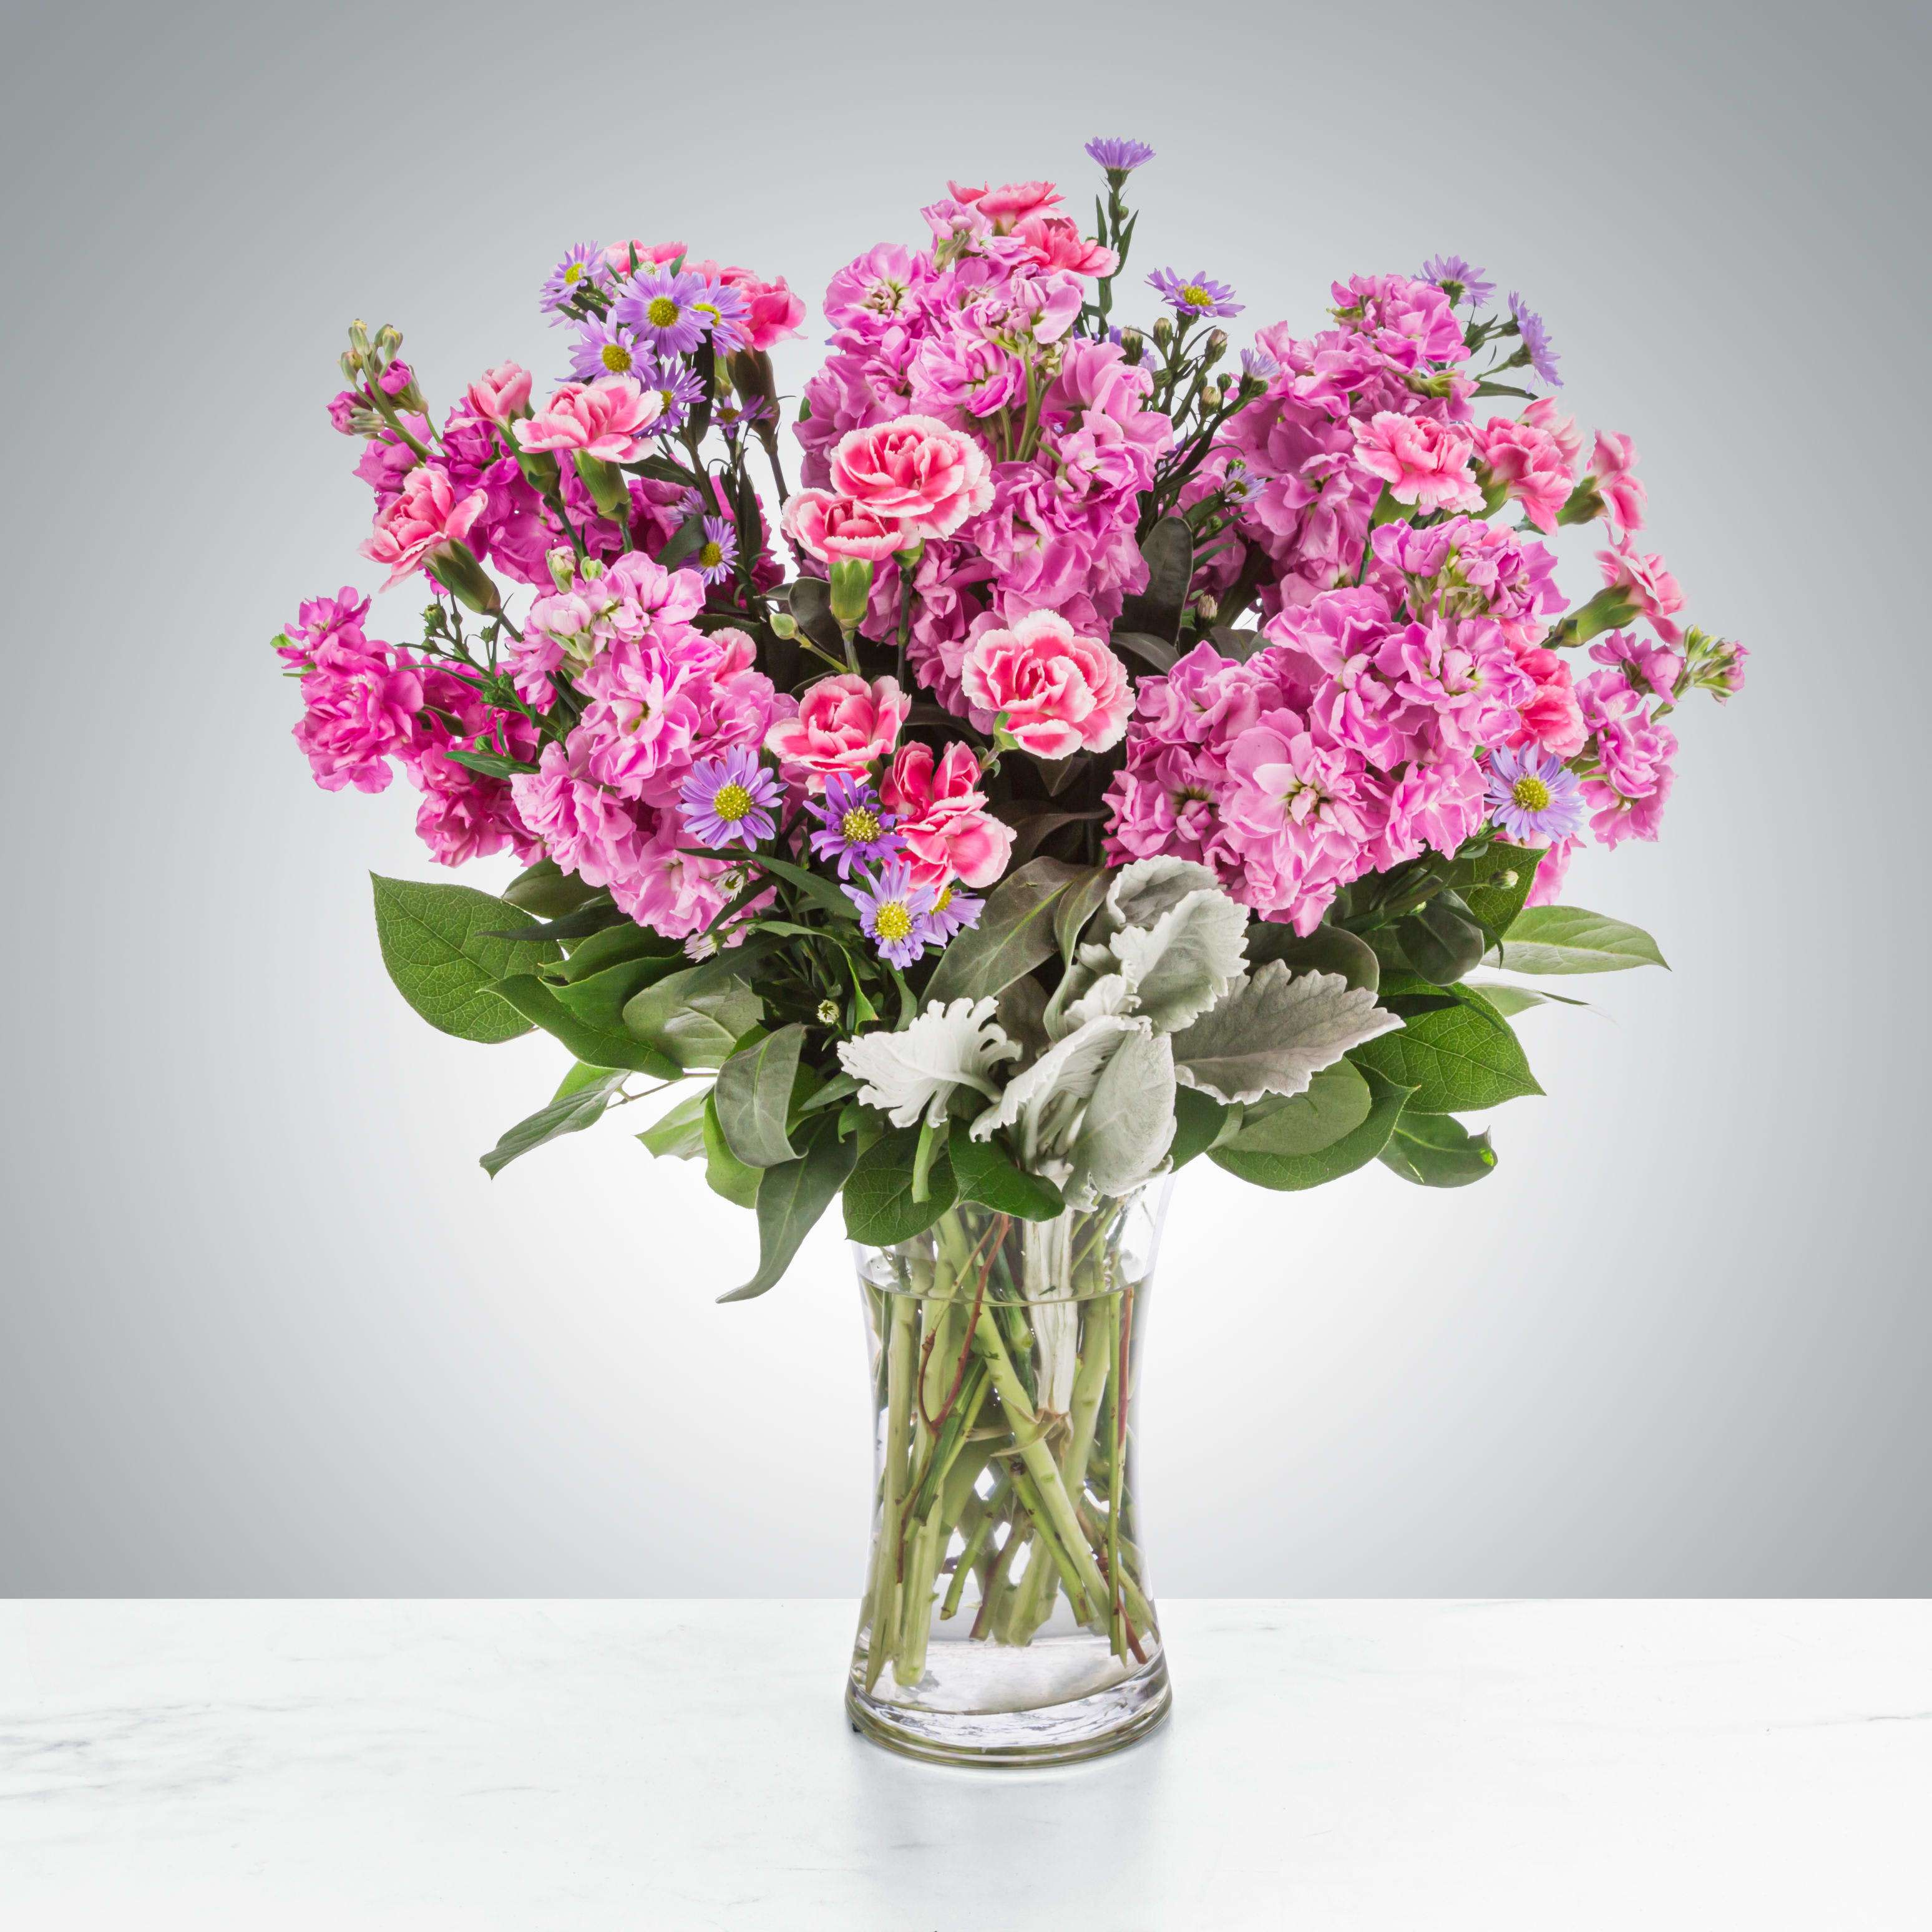 Uptown Girl by BloomNation™ - This arrangement is a pink and purple confection featuring sweet-smelling stock flowers and purple asters. A great gift for birthdays, women's day, or breast cancer awareness month.  Approximate Dimensions: 12&quot;D x 17&quot;H